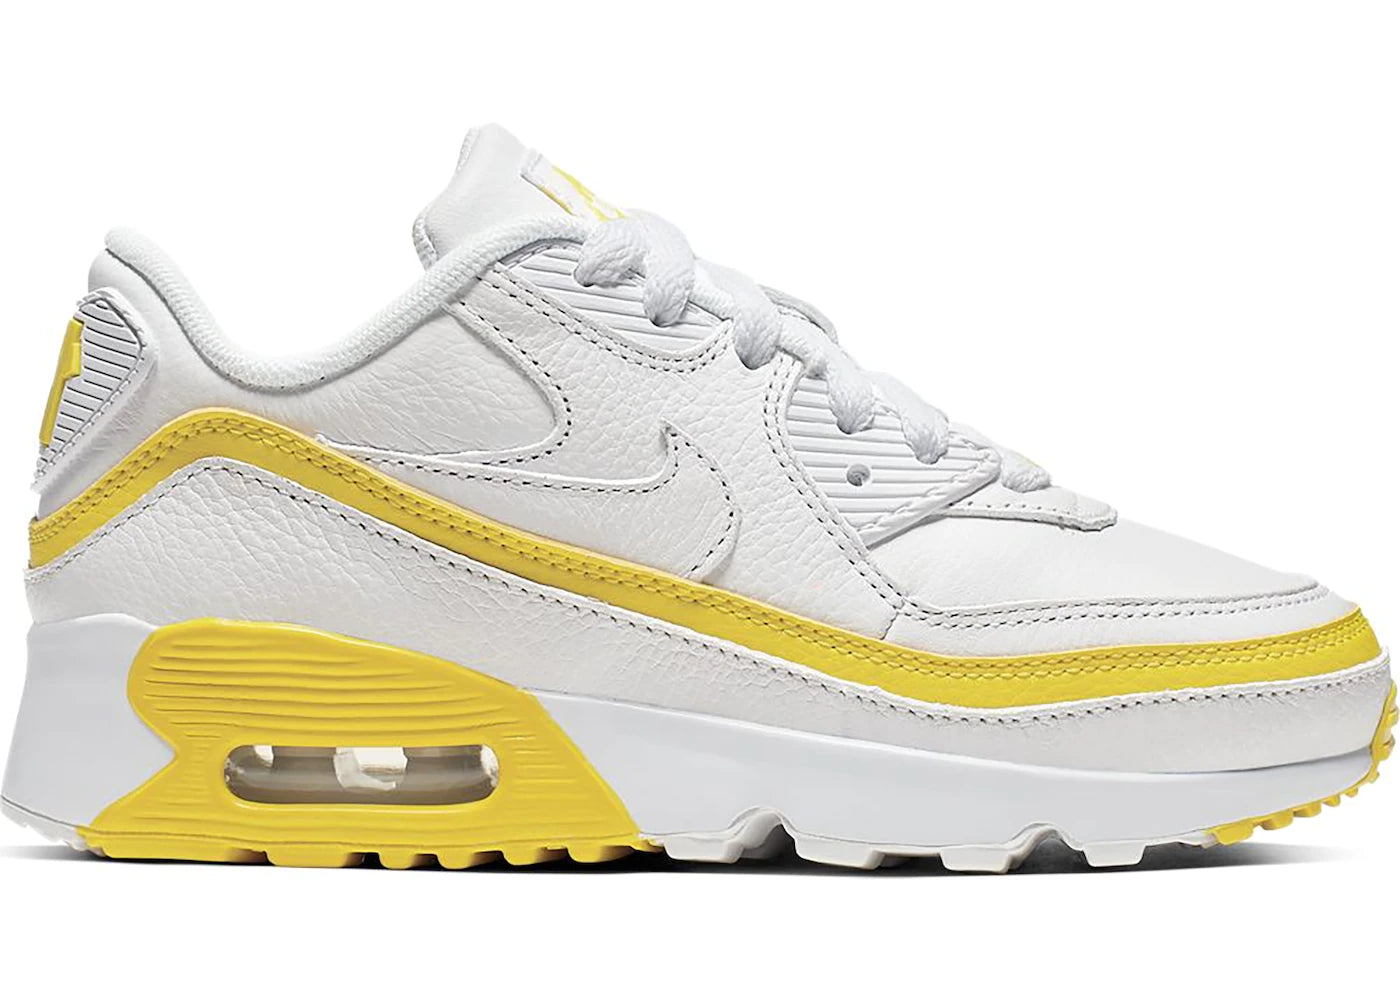 Air Max 90 Undefeated White Opti Yellow (TD)